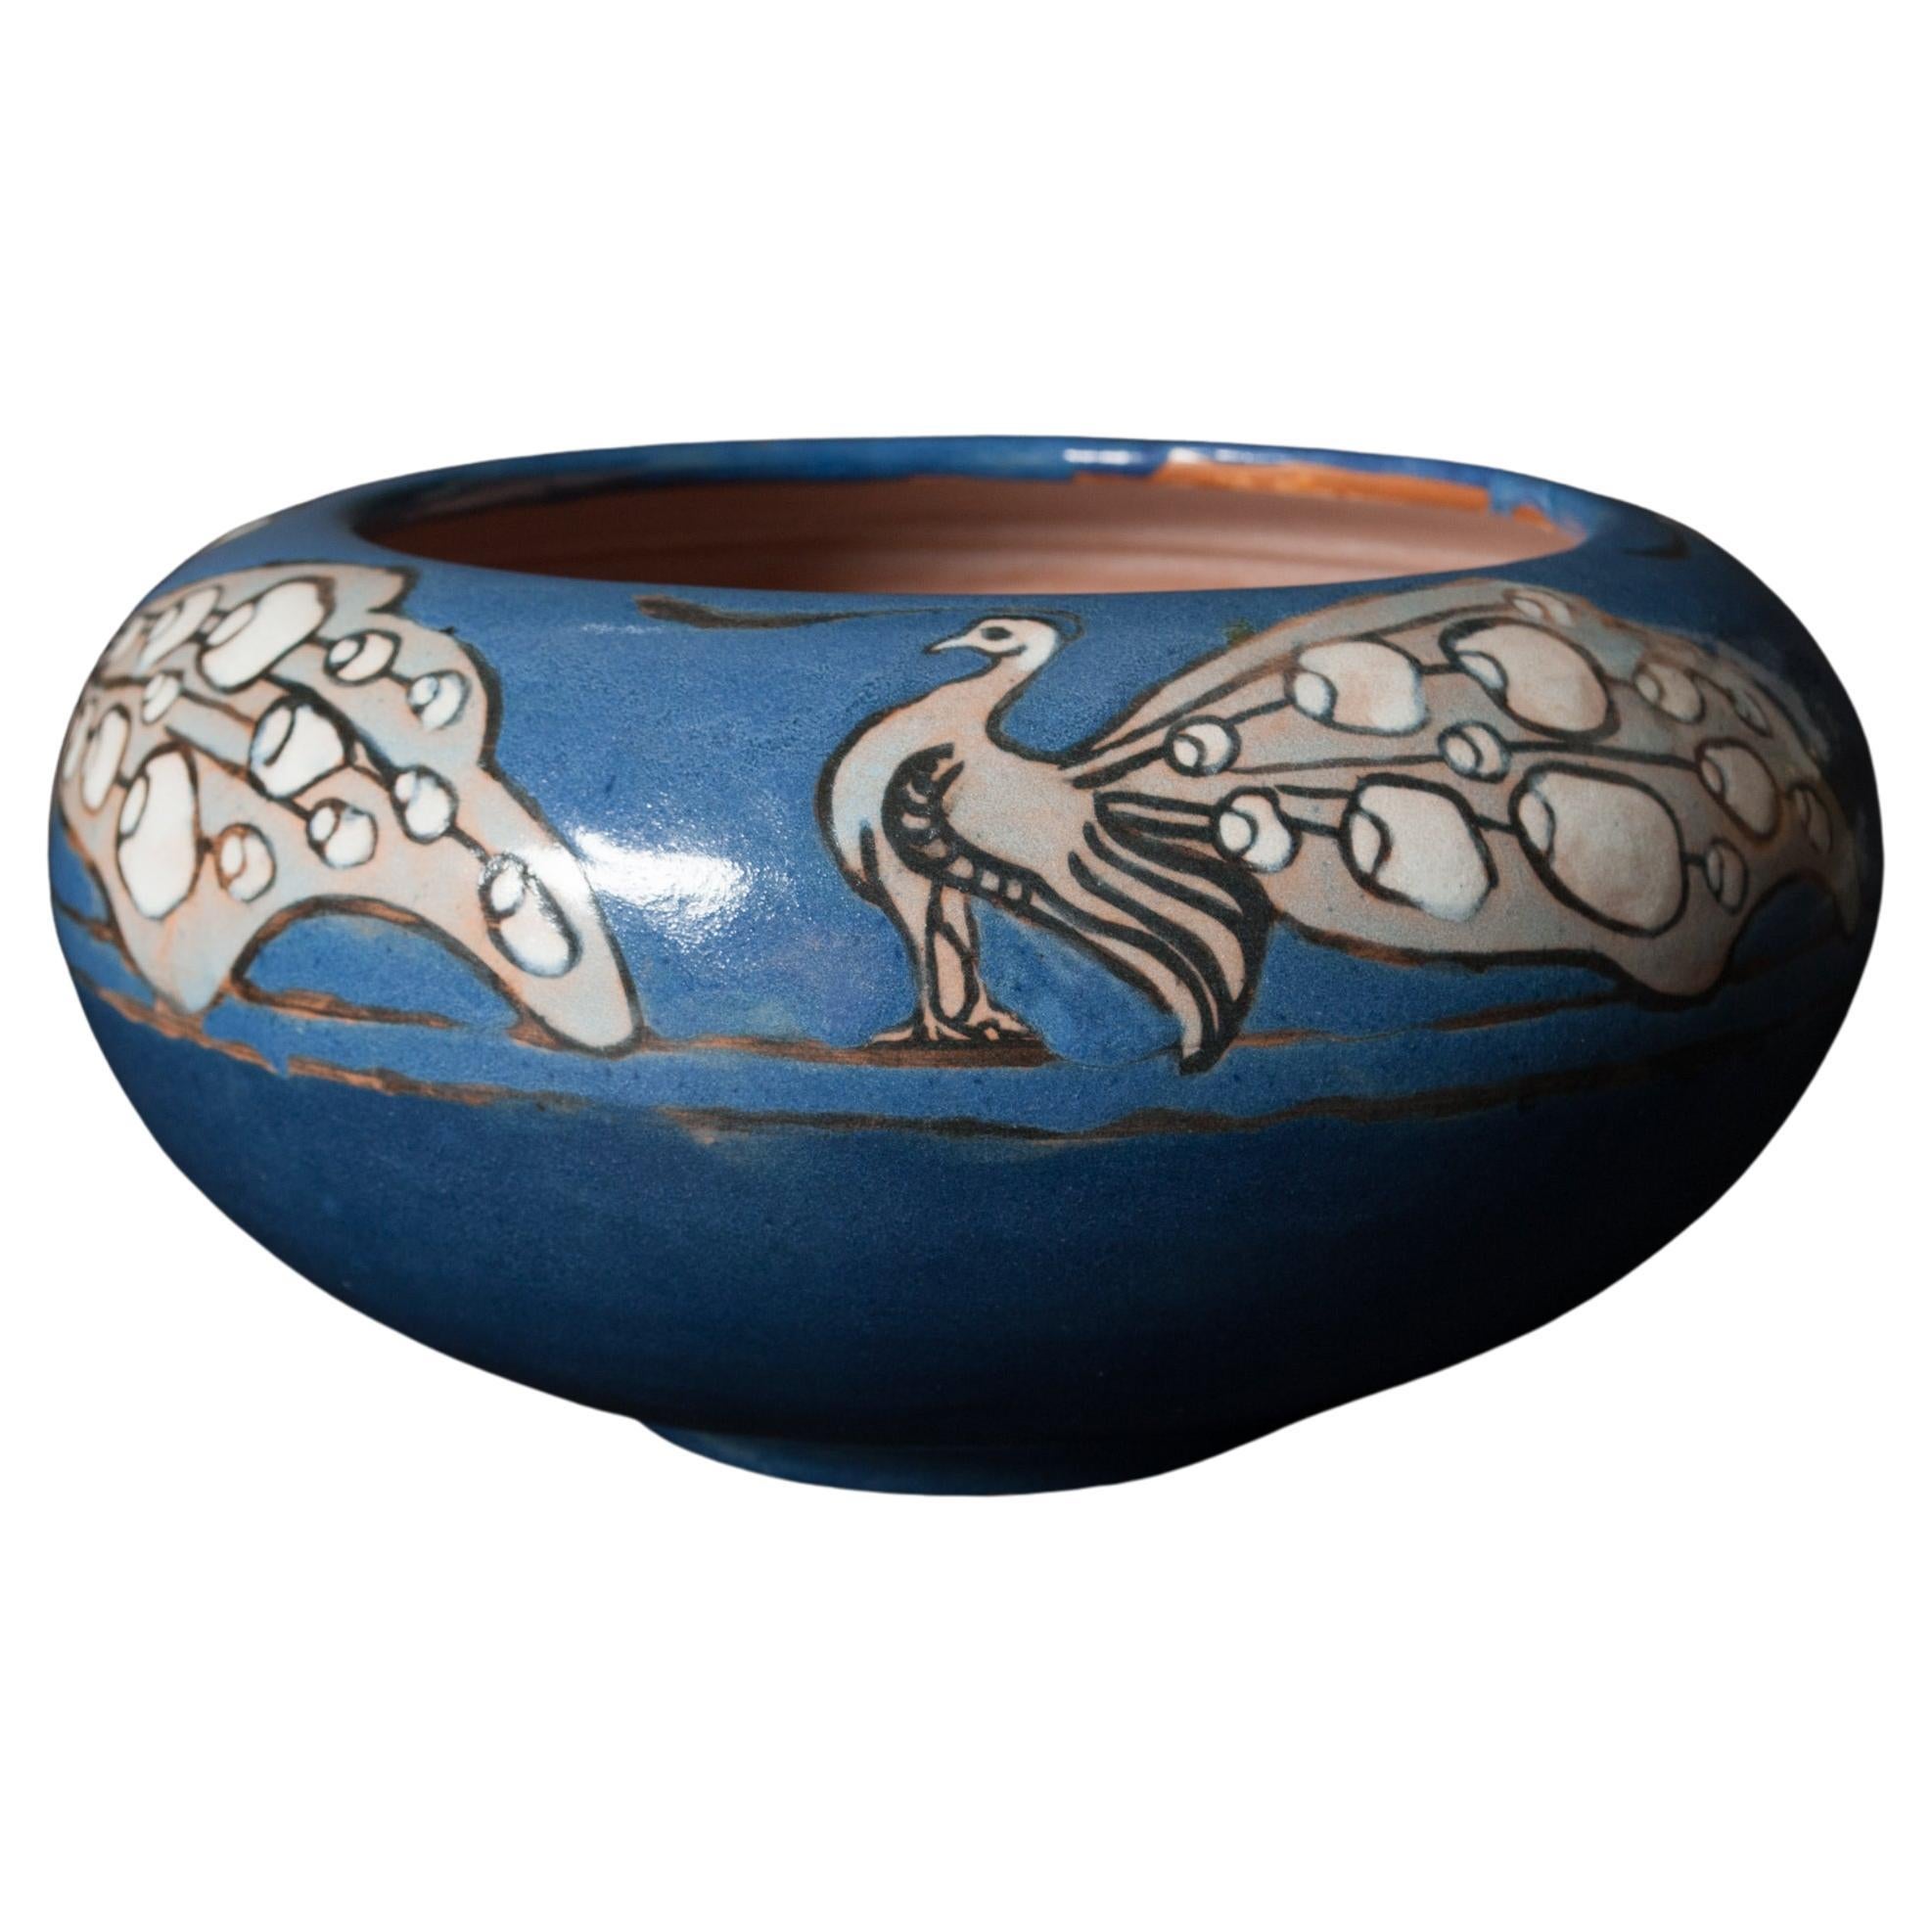 Arts & Crafts Hand-Thrown Peacock Bowl by Frederick Rhead